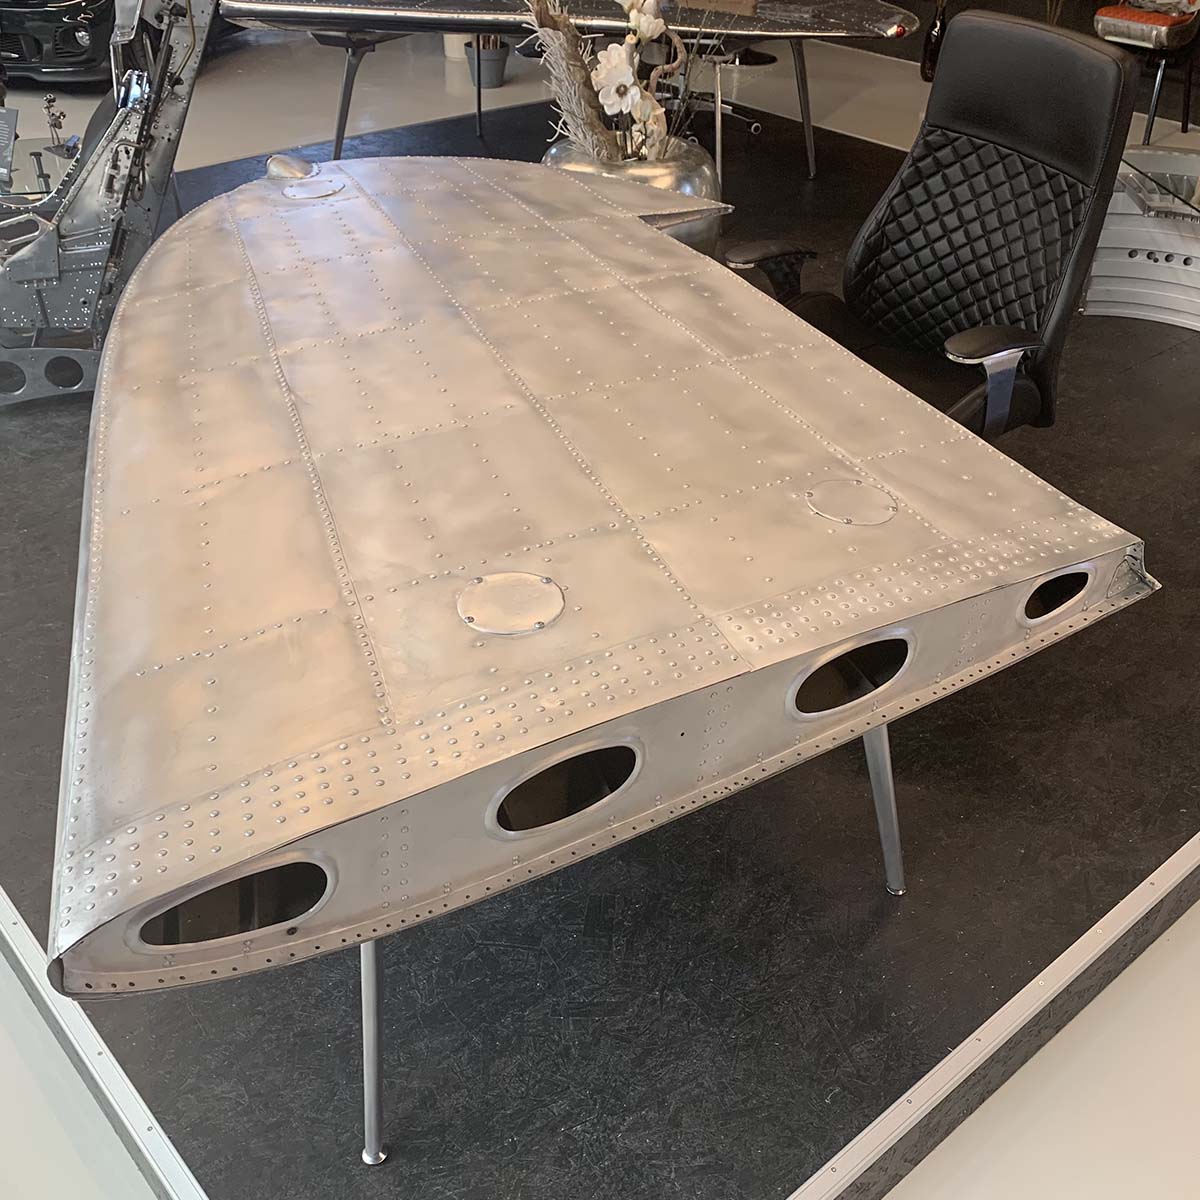 Overview of a Douglas DC-3 Dakota wingtip with matte finish and converted into a table for sale.